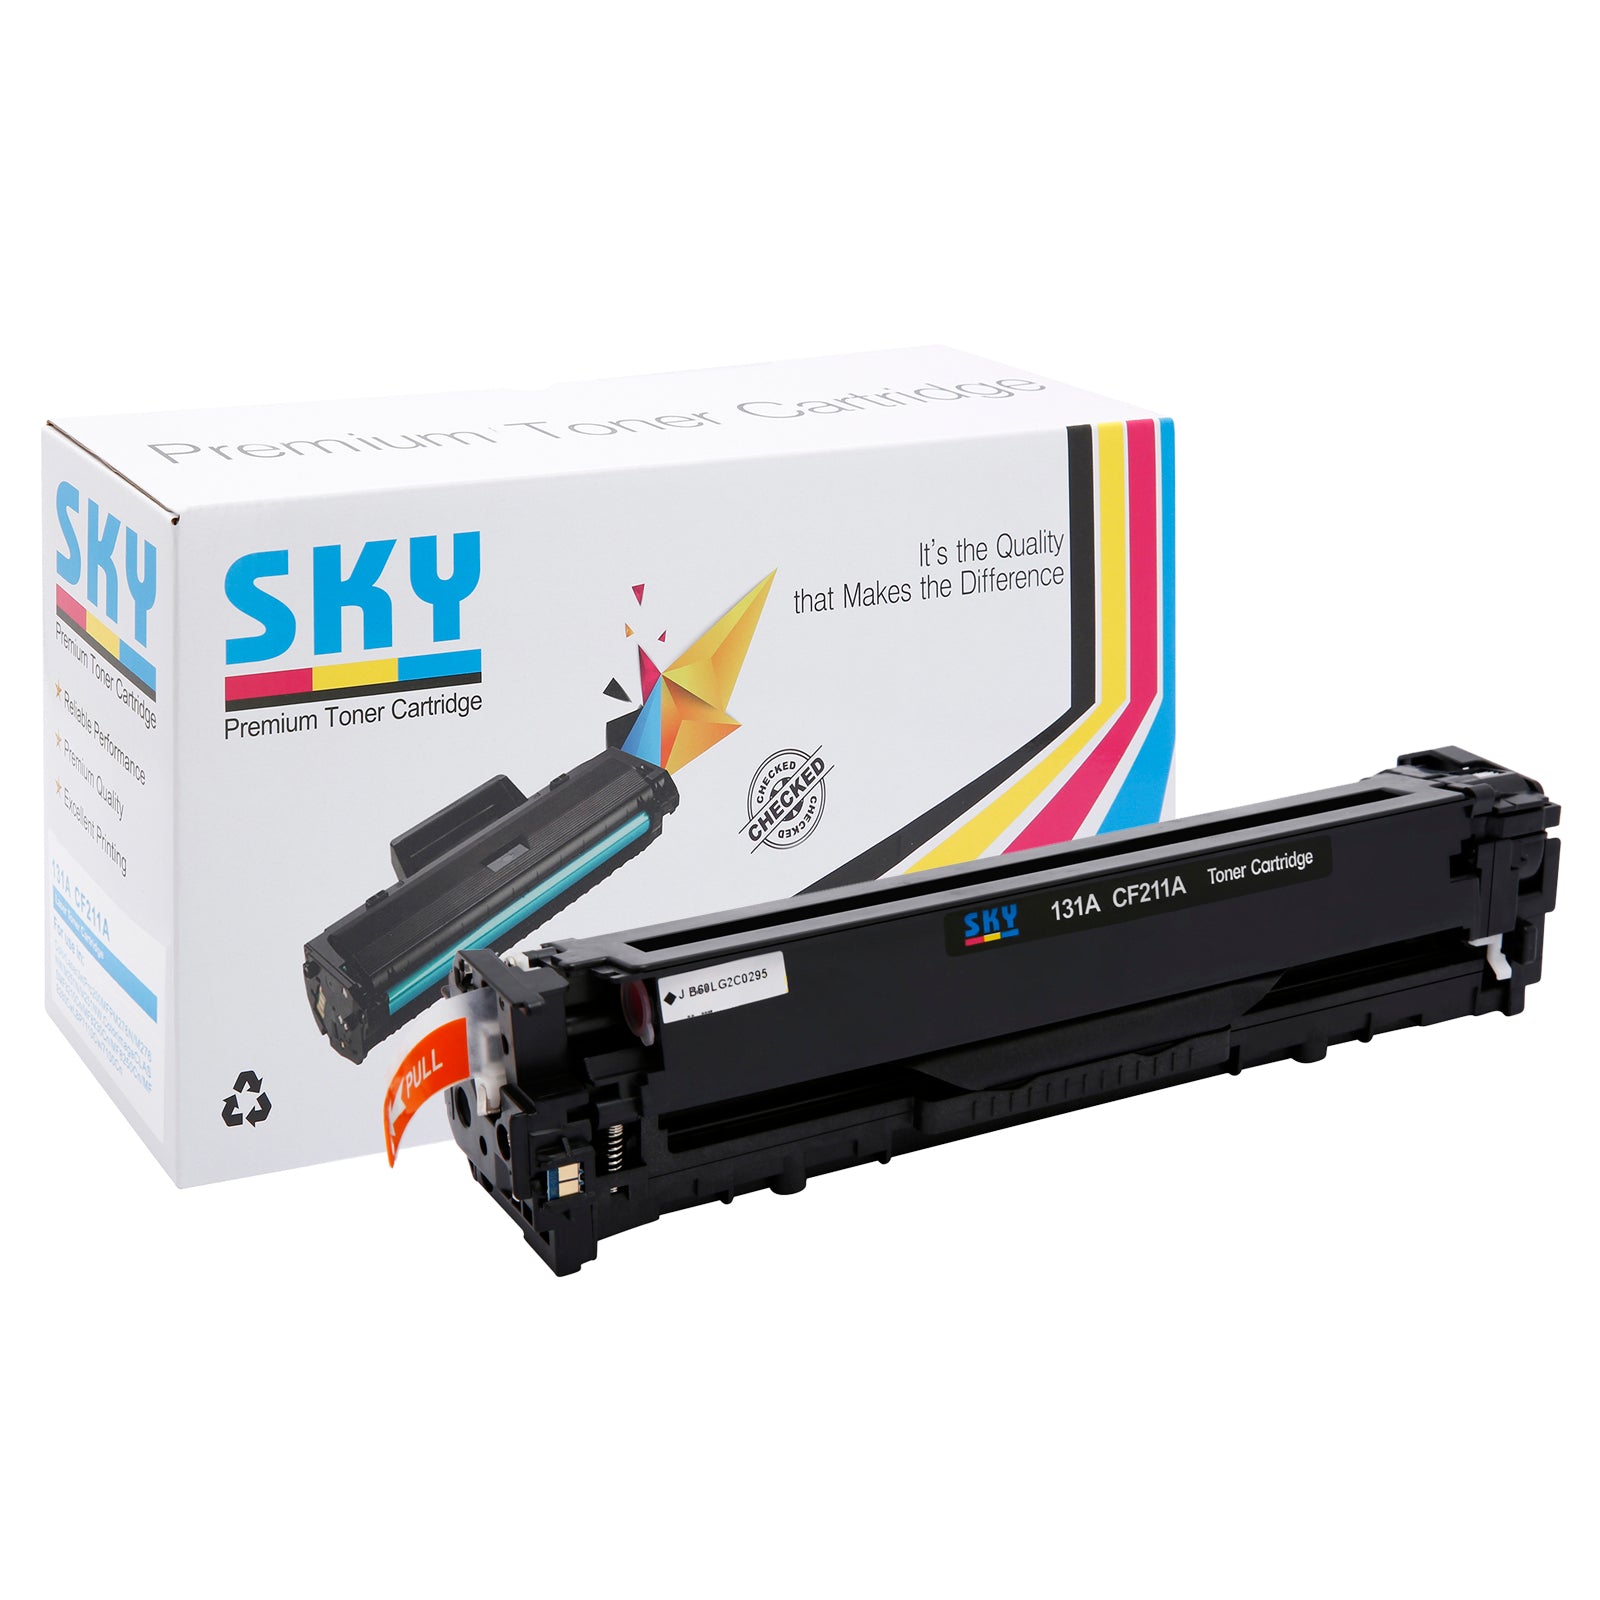 SKY 731 Compatible Toner Cartridges for imageCLASS MF8280Cw and MF628CW Printer